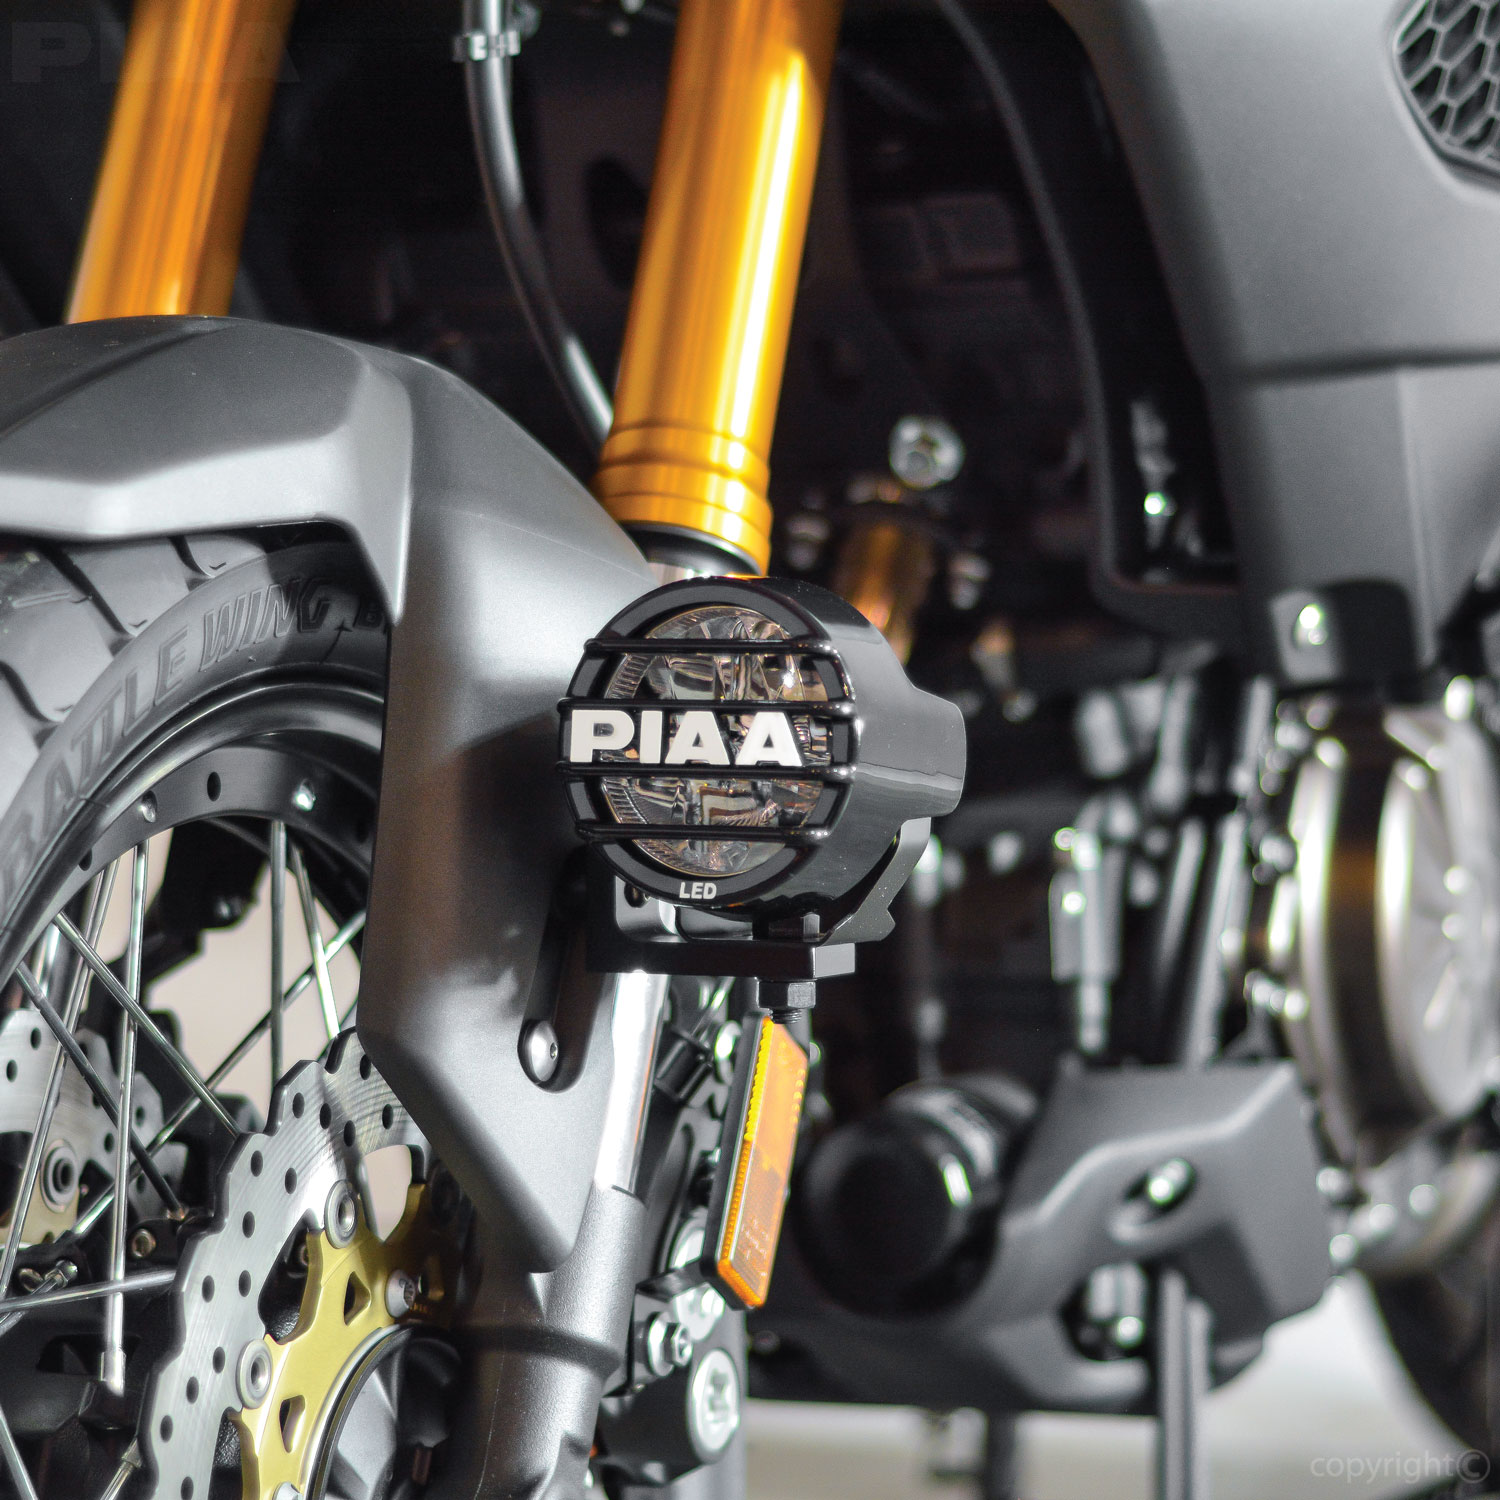 PIAA LED Lights for KTM Motorcycles